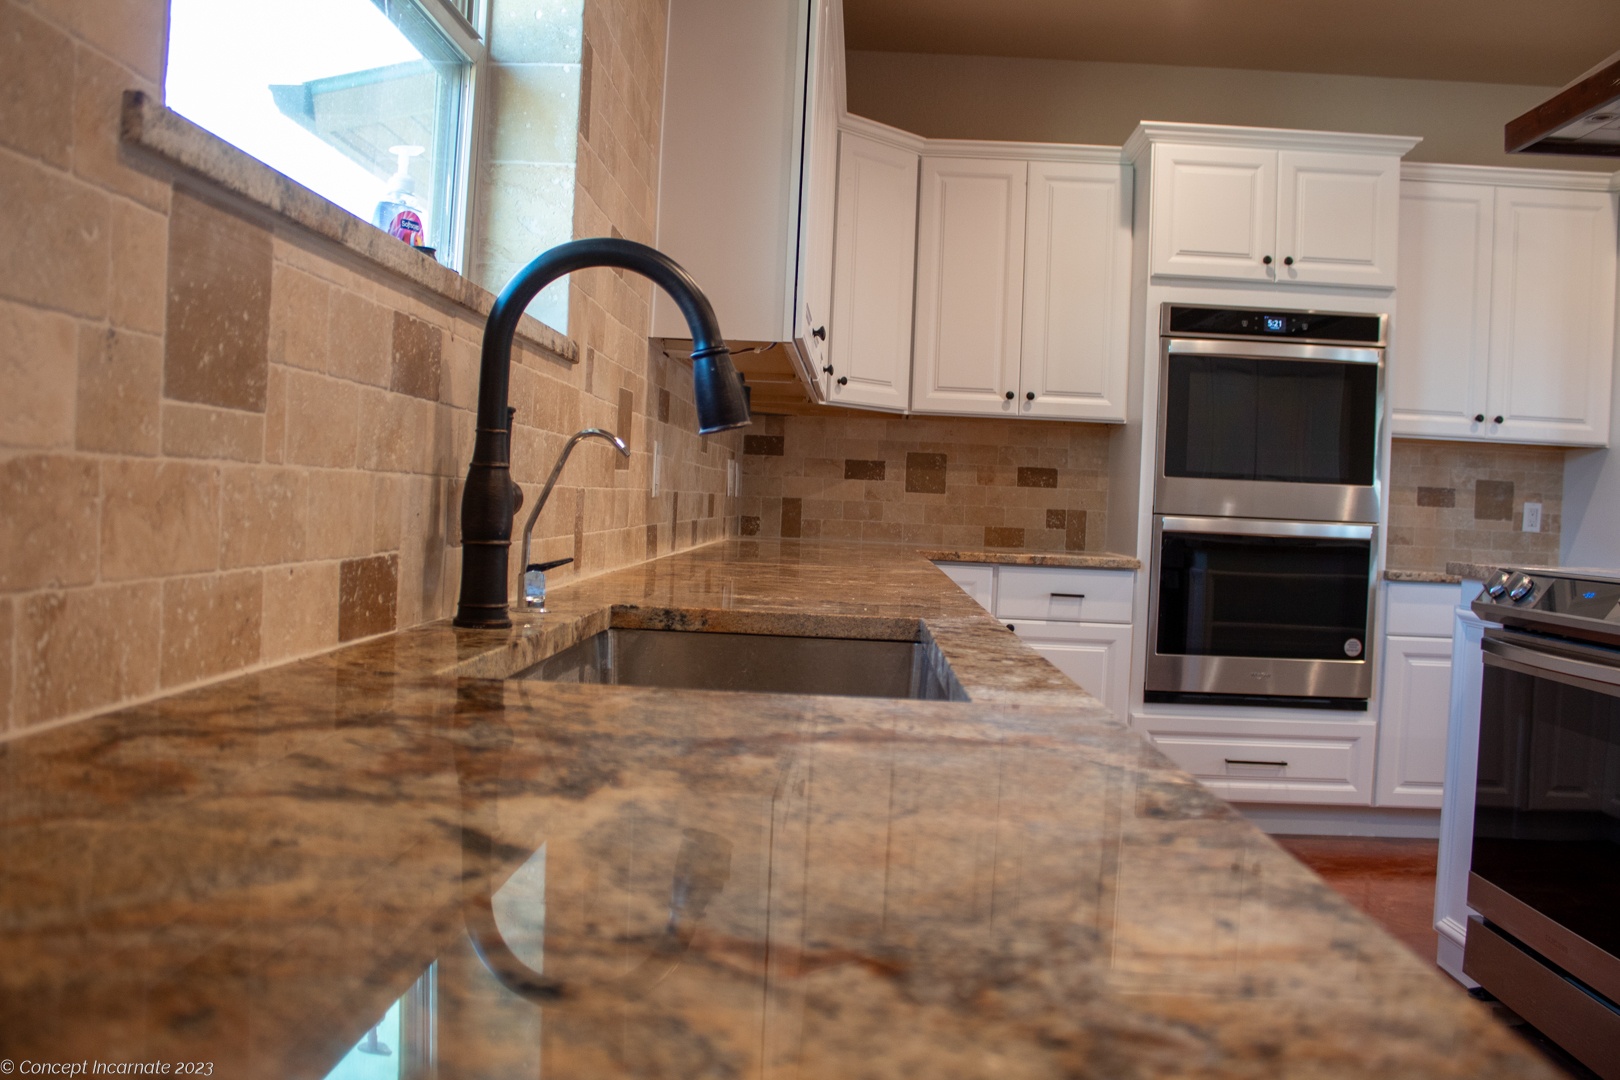 Undermount sink and granite counter in club house kitchen